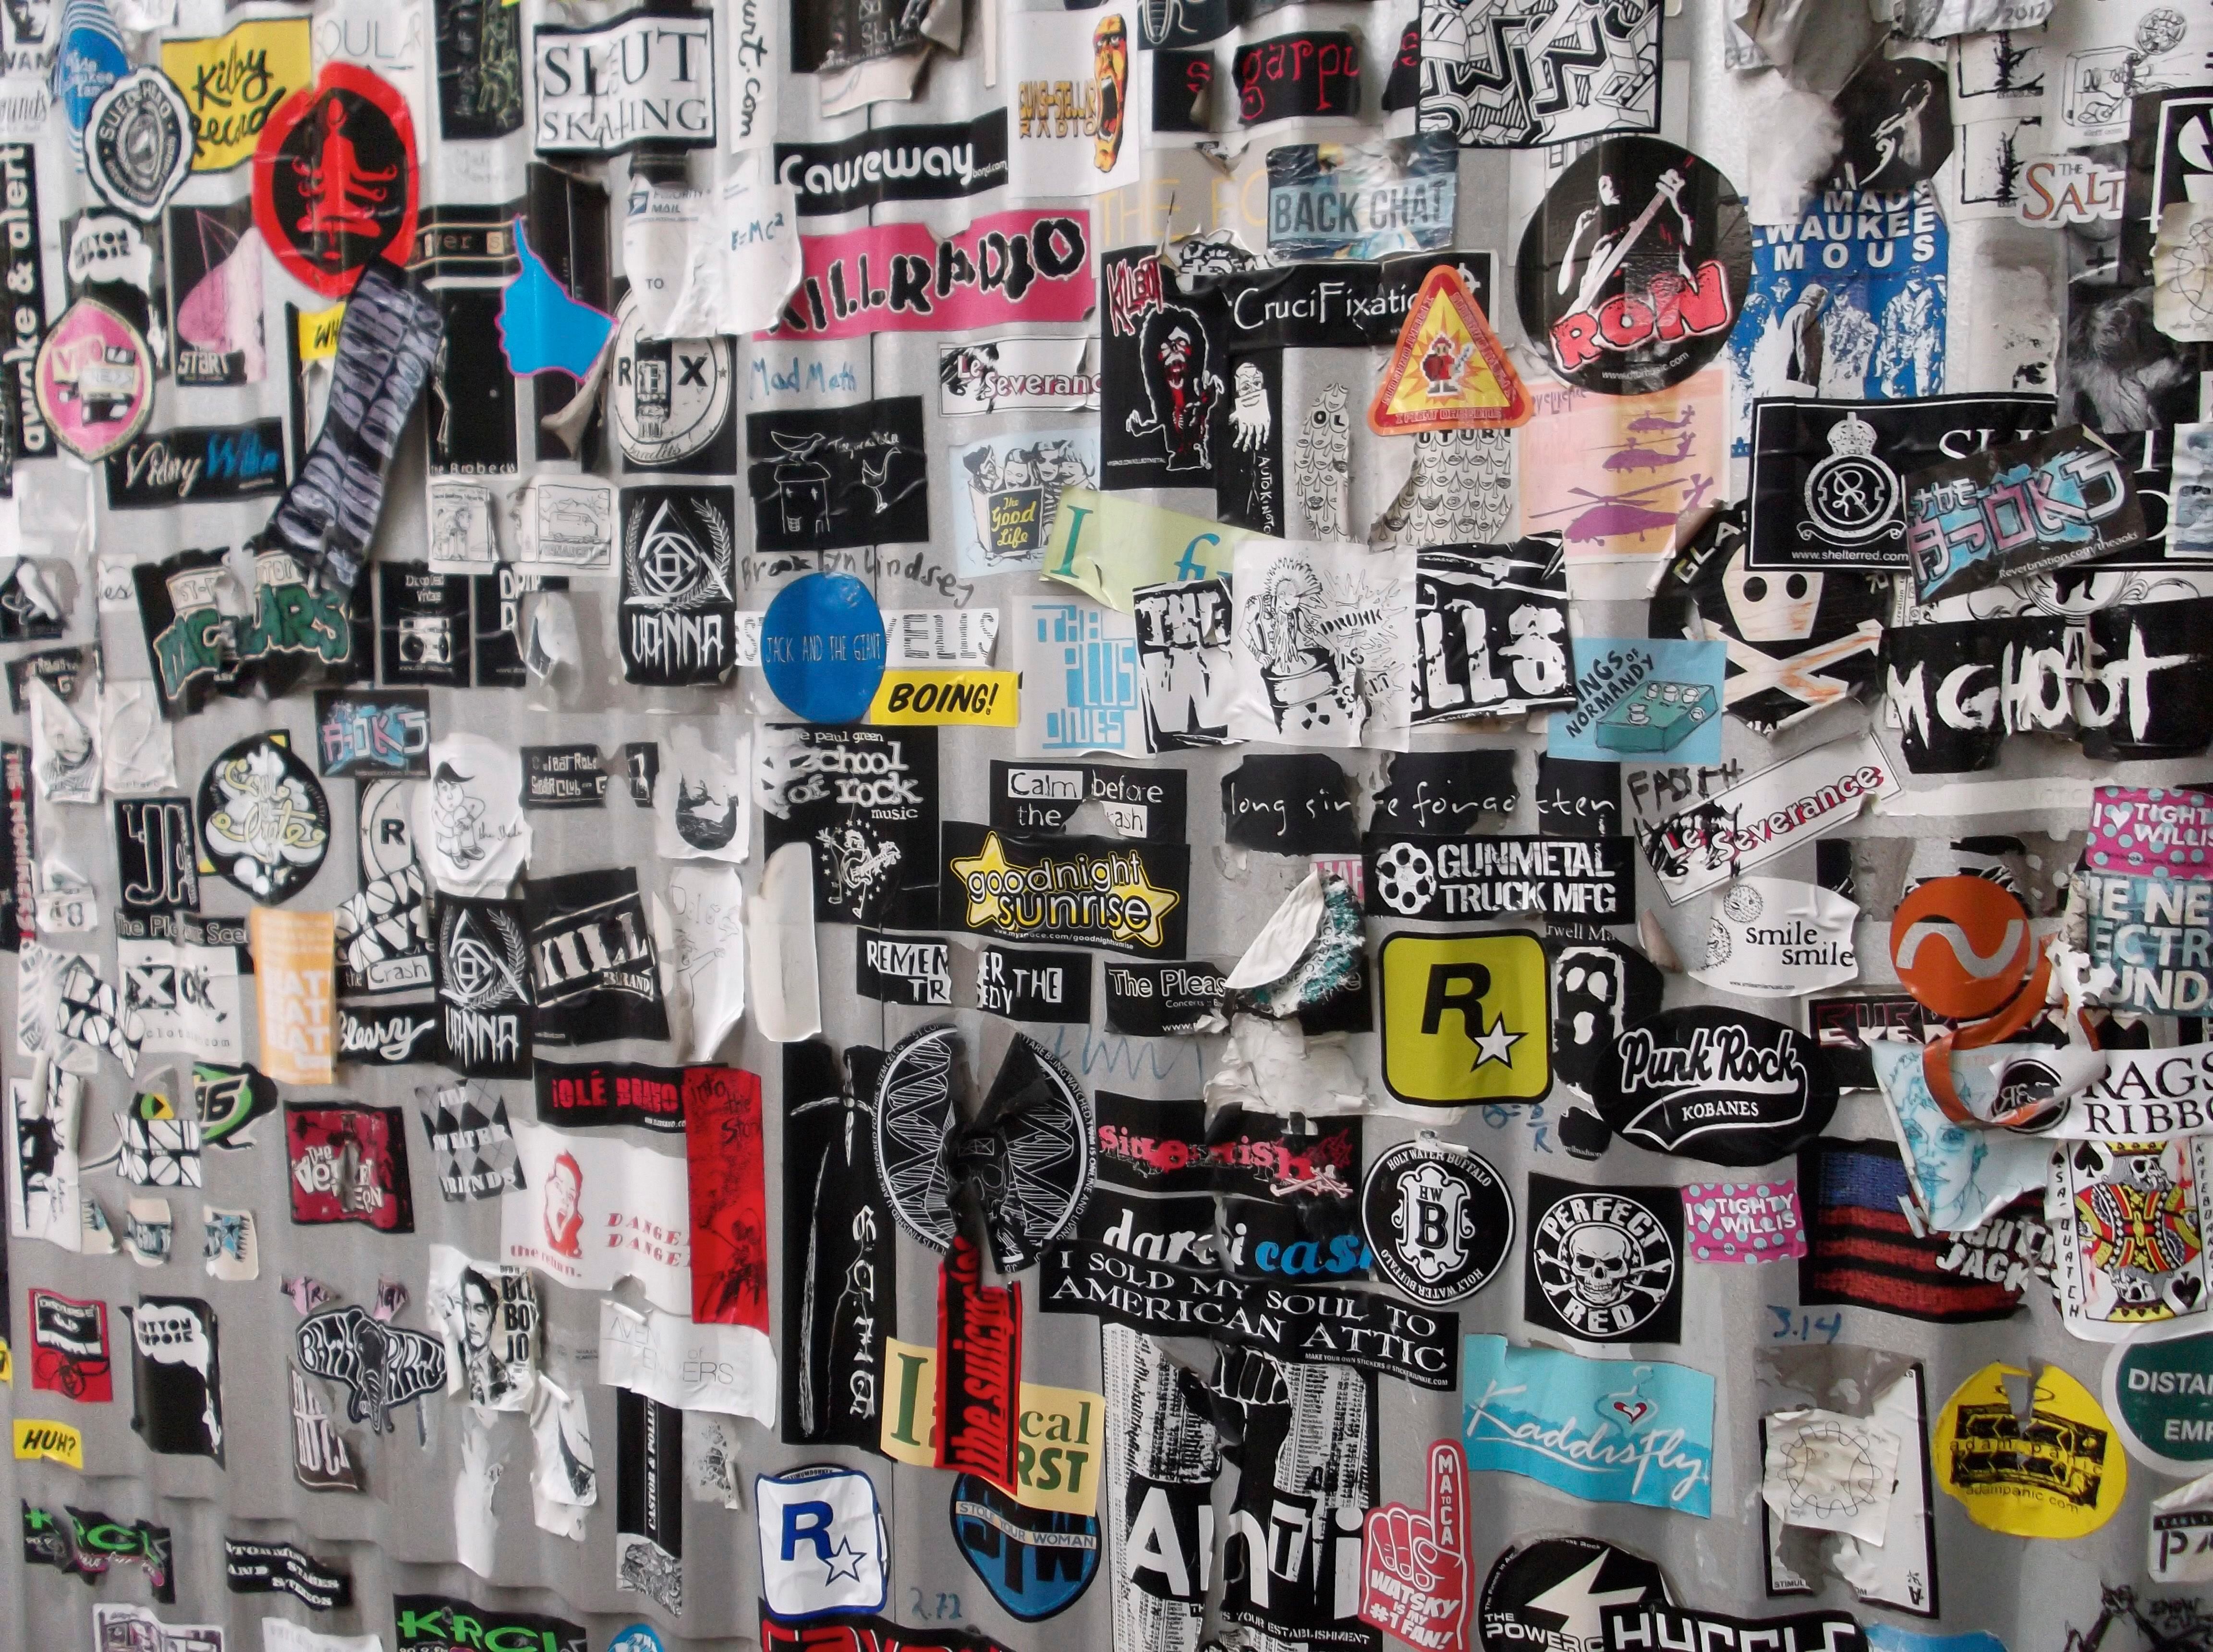 (Sean P. Means  |  Tribune file photo) A wall of stickers at Kilby Court in Salt Lake City shows the many bands that have played there. The all-ages music venue turns 20 this year.